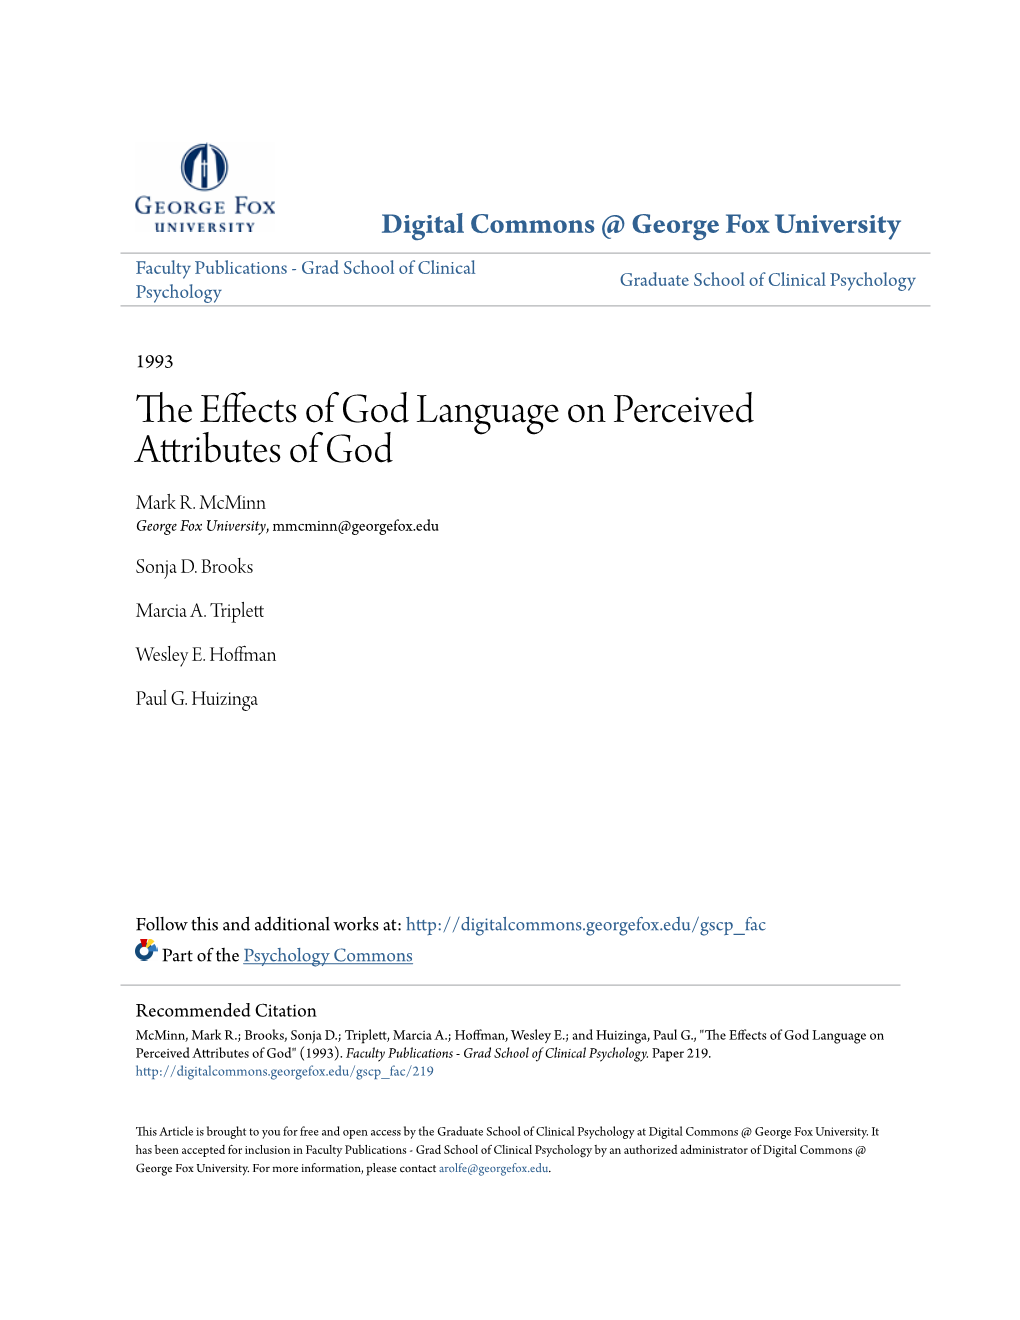 The Effects of God Language on Perceived Attributes of God" (1993)